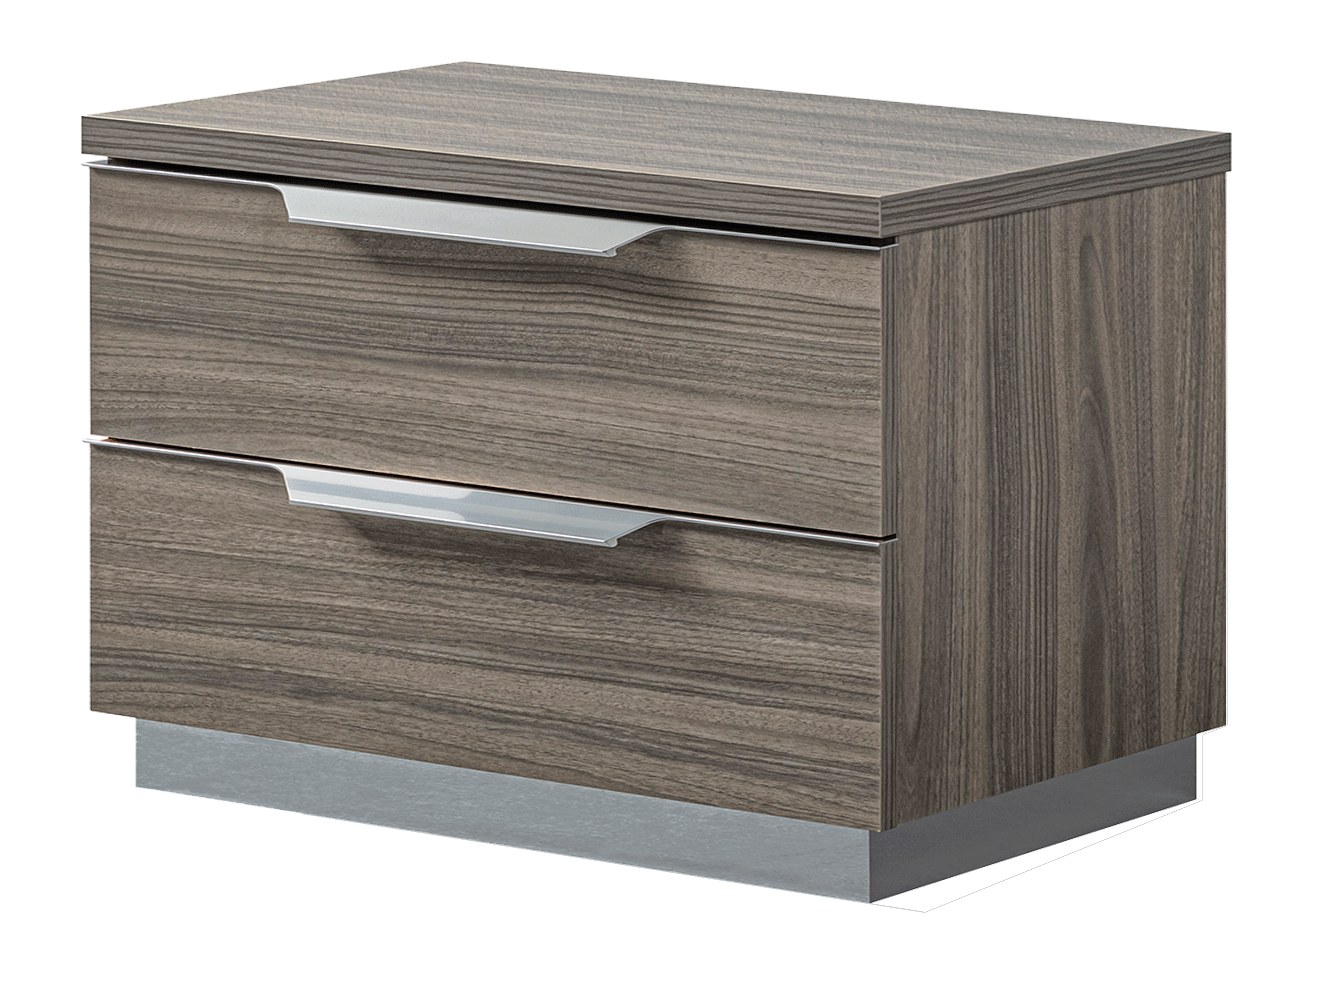 Brands Camel Modern Living Rooms, Italy Kroma Nightstand GREY